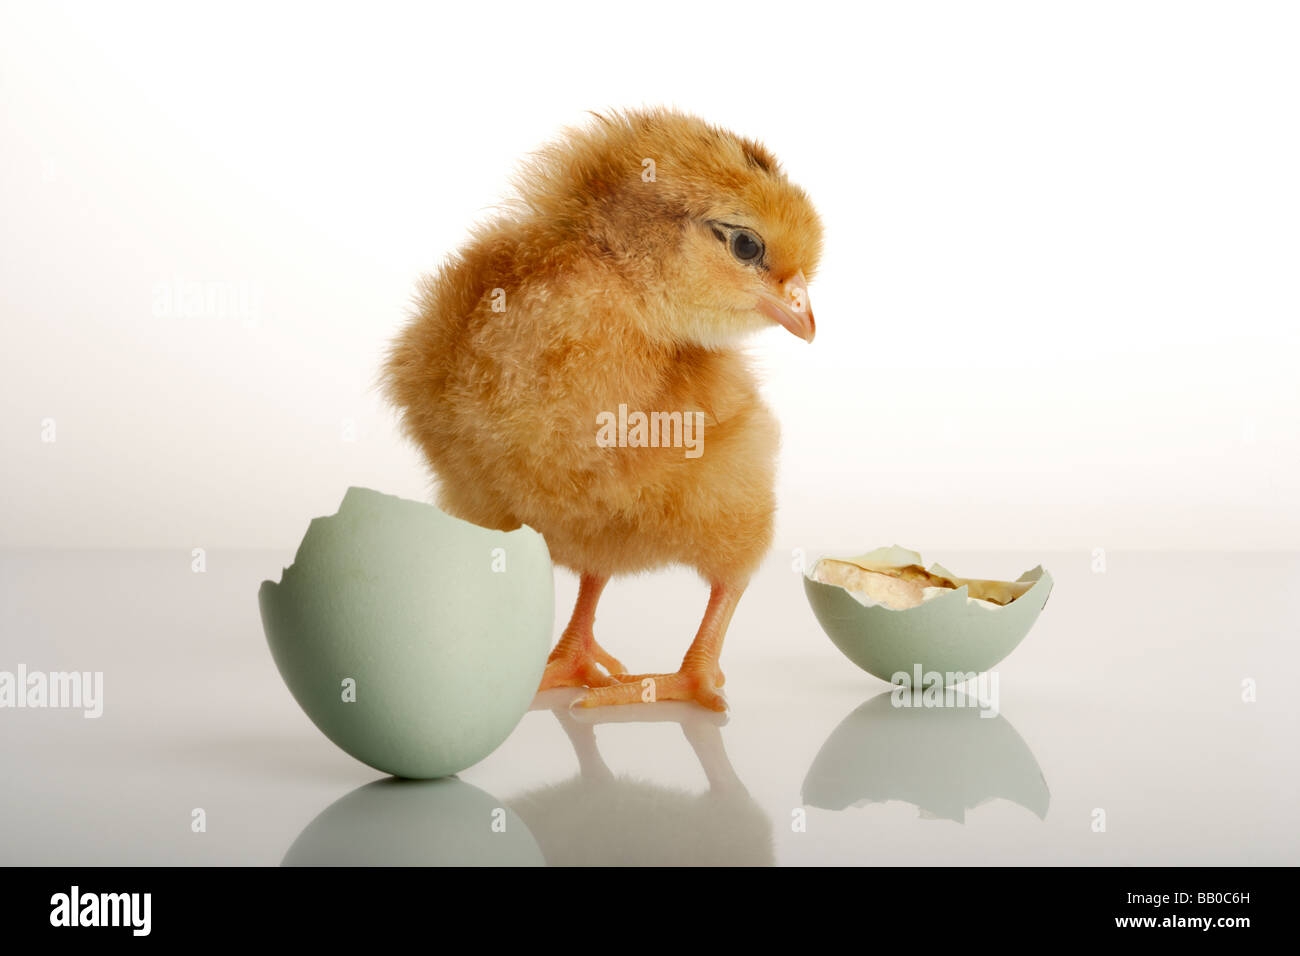 Newly born chick and hatched egg Stock Photo